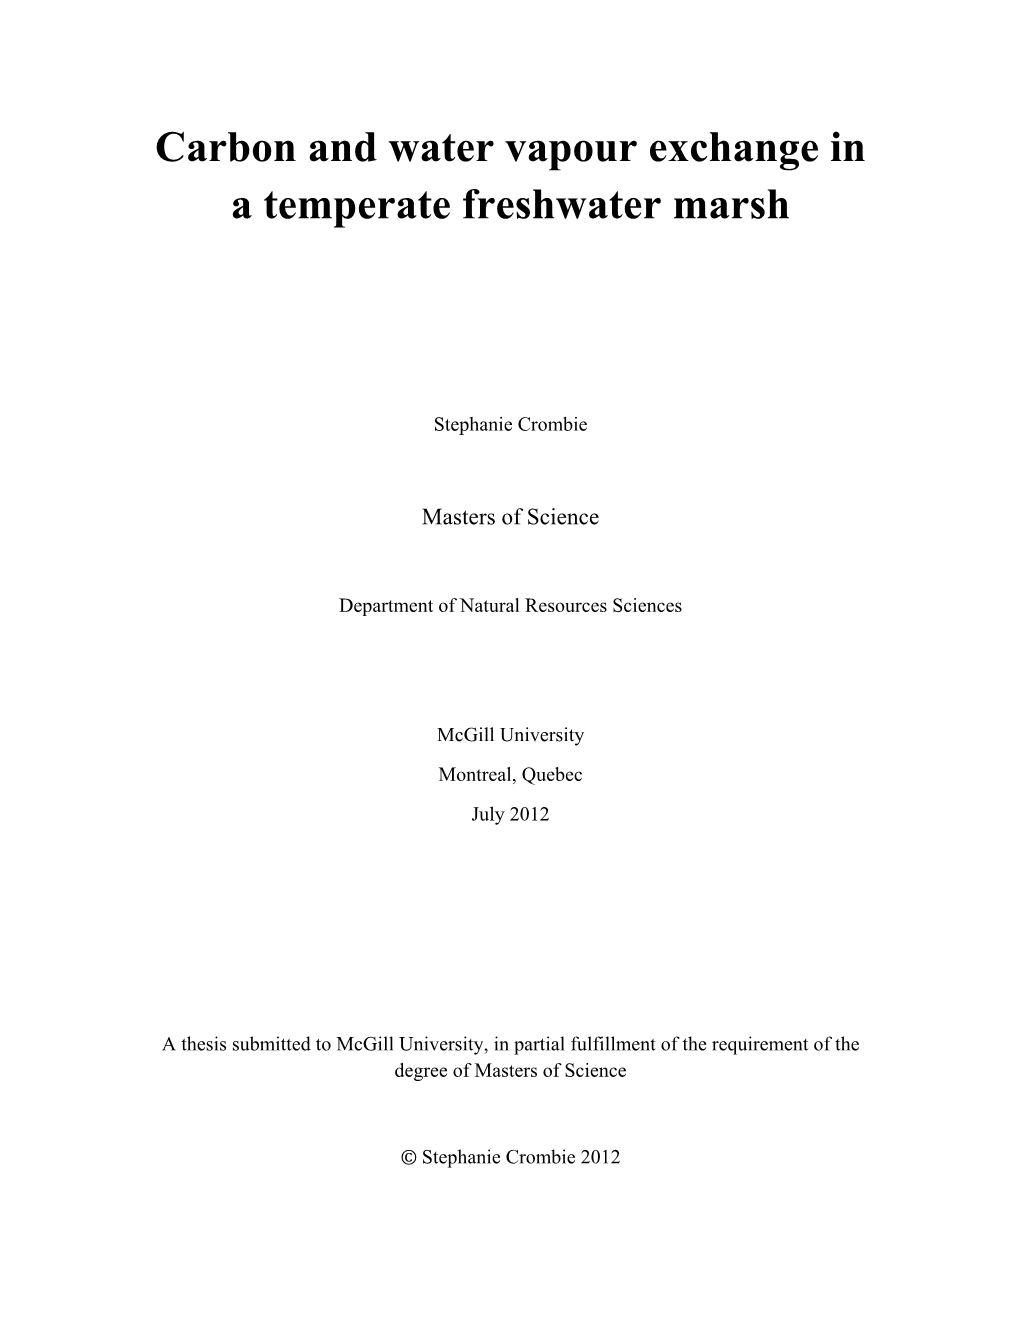 Carbon and Water Vapour Exchange in a Temperate Freshwater Marsh